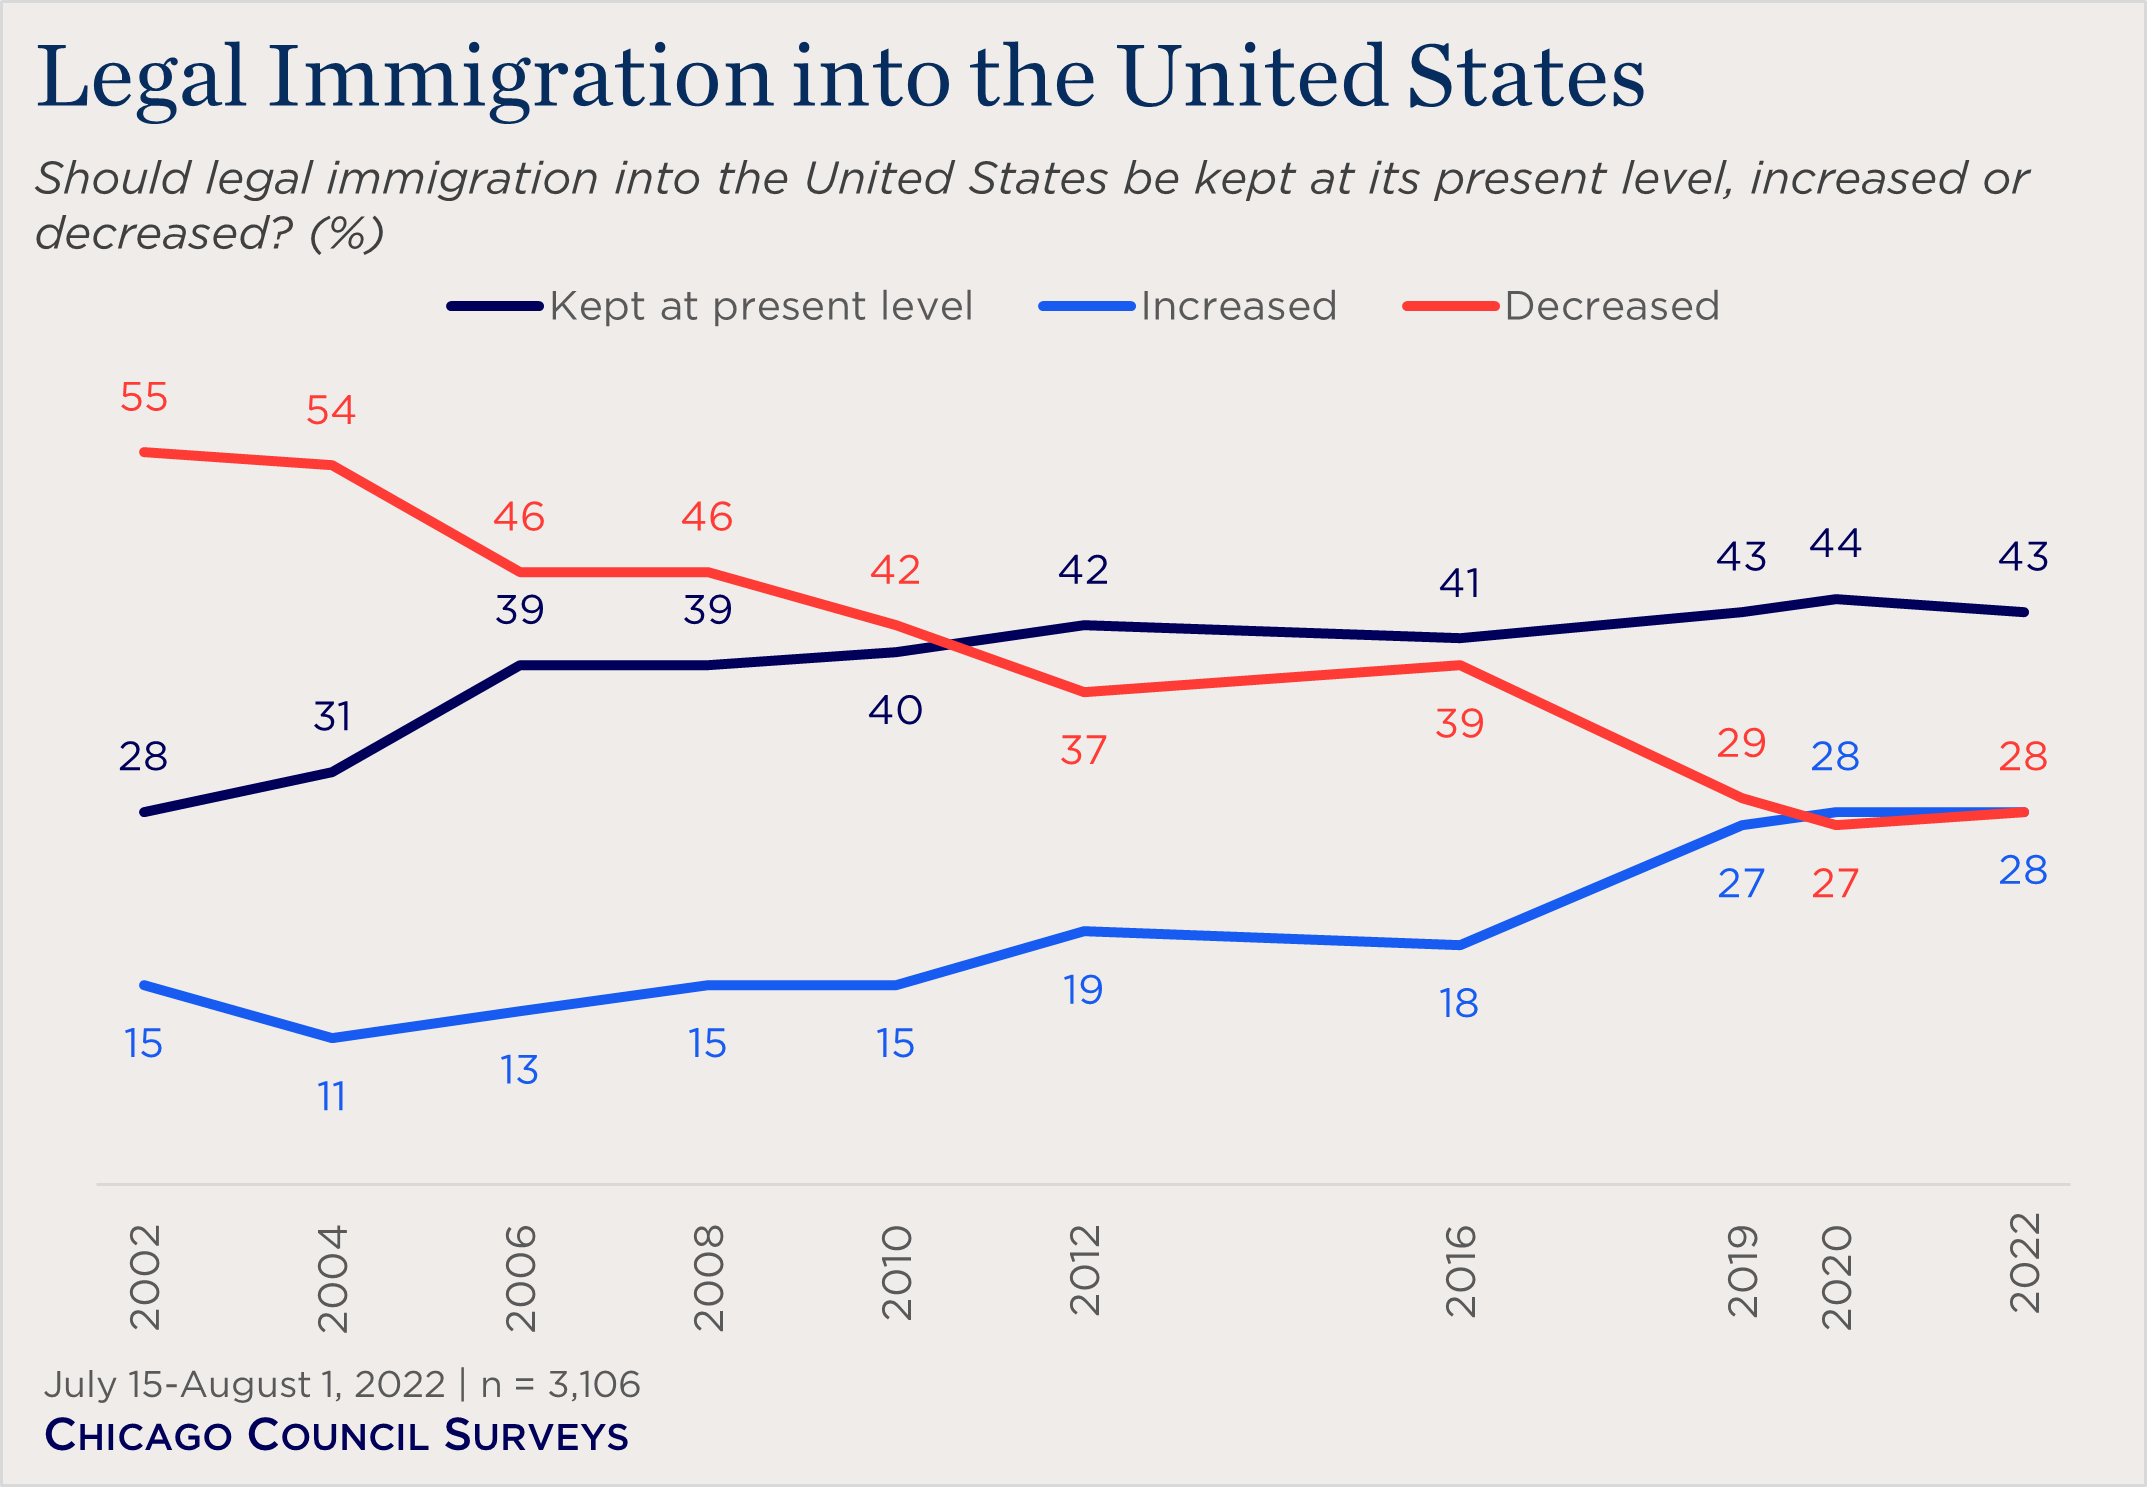 line chart showing views on US immigration levels over time